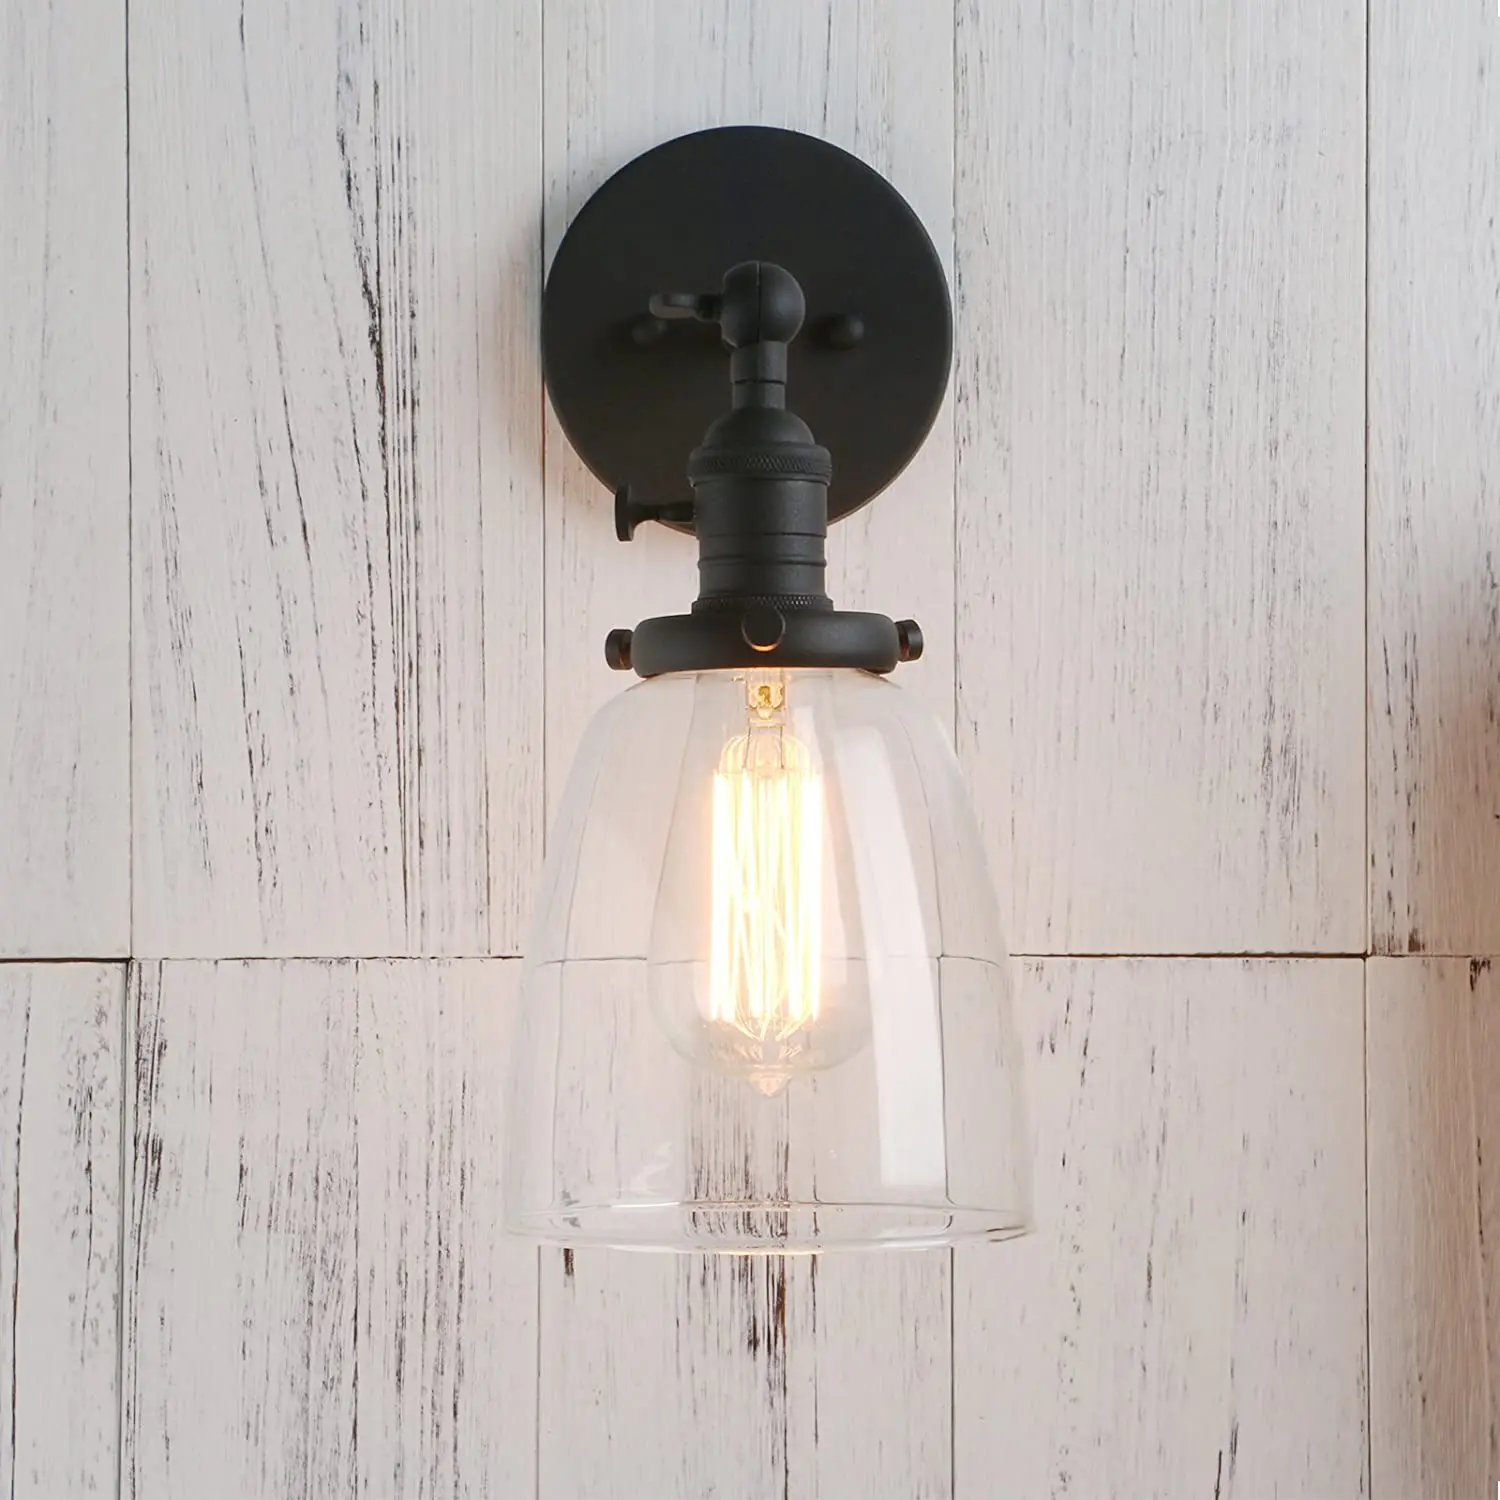 Vintage Industrial Wall Light Sconce Funnel Glass Shade Lamp Fixture w Switch 